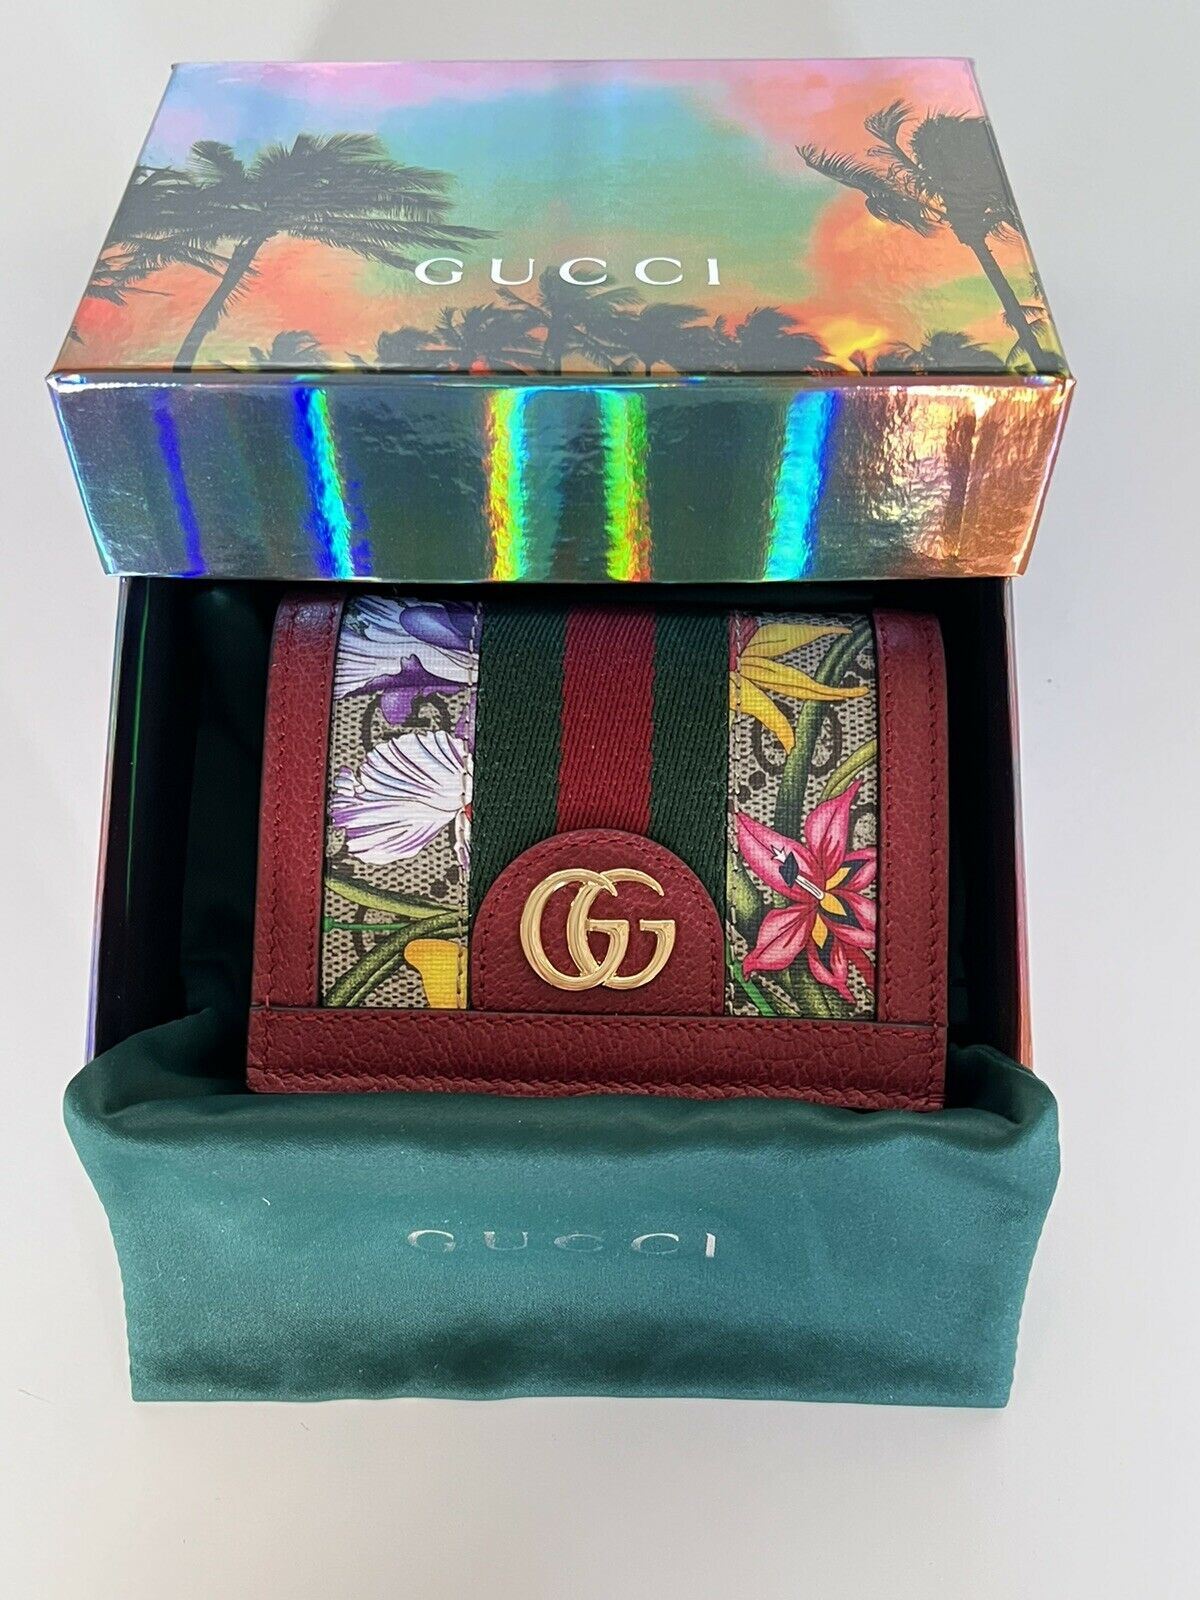 GUCCI Ophidia Flora GG Supreme Canvas Card Case Wallet Red 523155 - 10